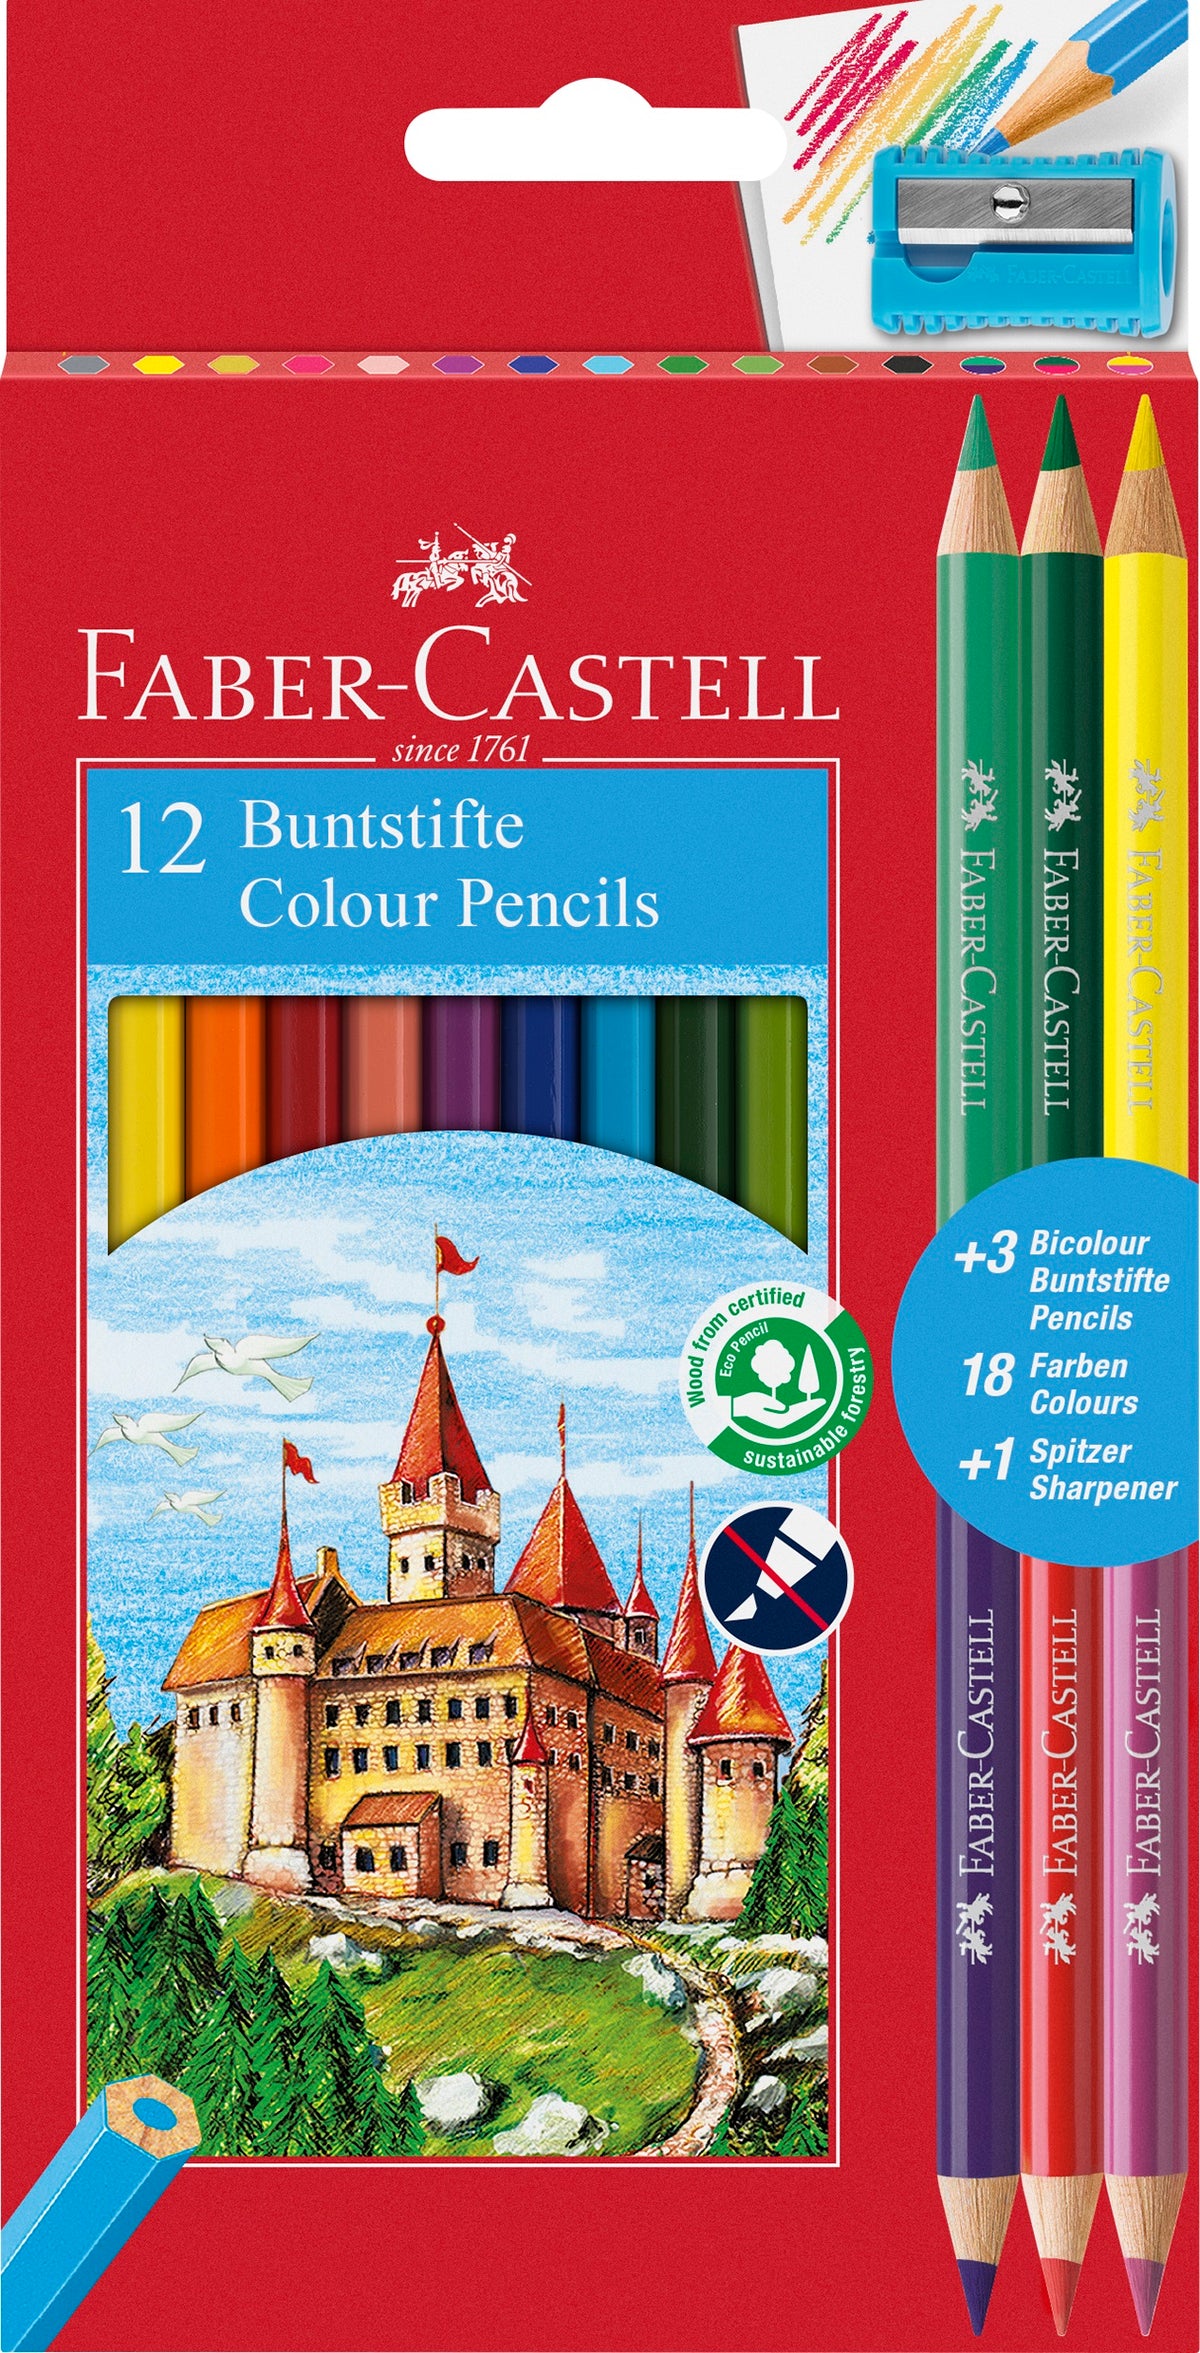 Retail packaging for a pack of 12 colour pencils by Faber Castell. The packaging has a red border, a cut out in the centre showing the pencils inside plus an illustration of them in use. This package includes 3 double ended colour pencils.